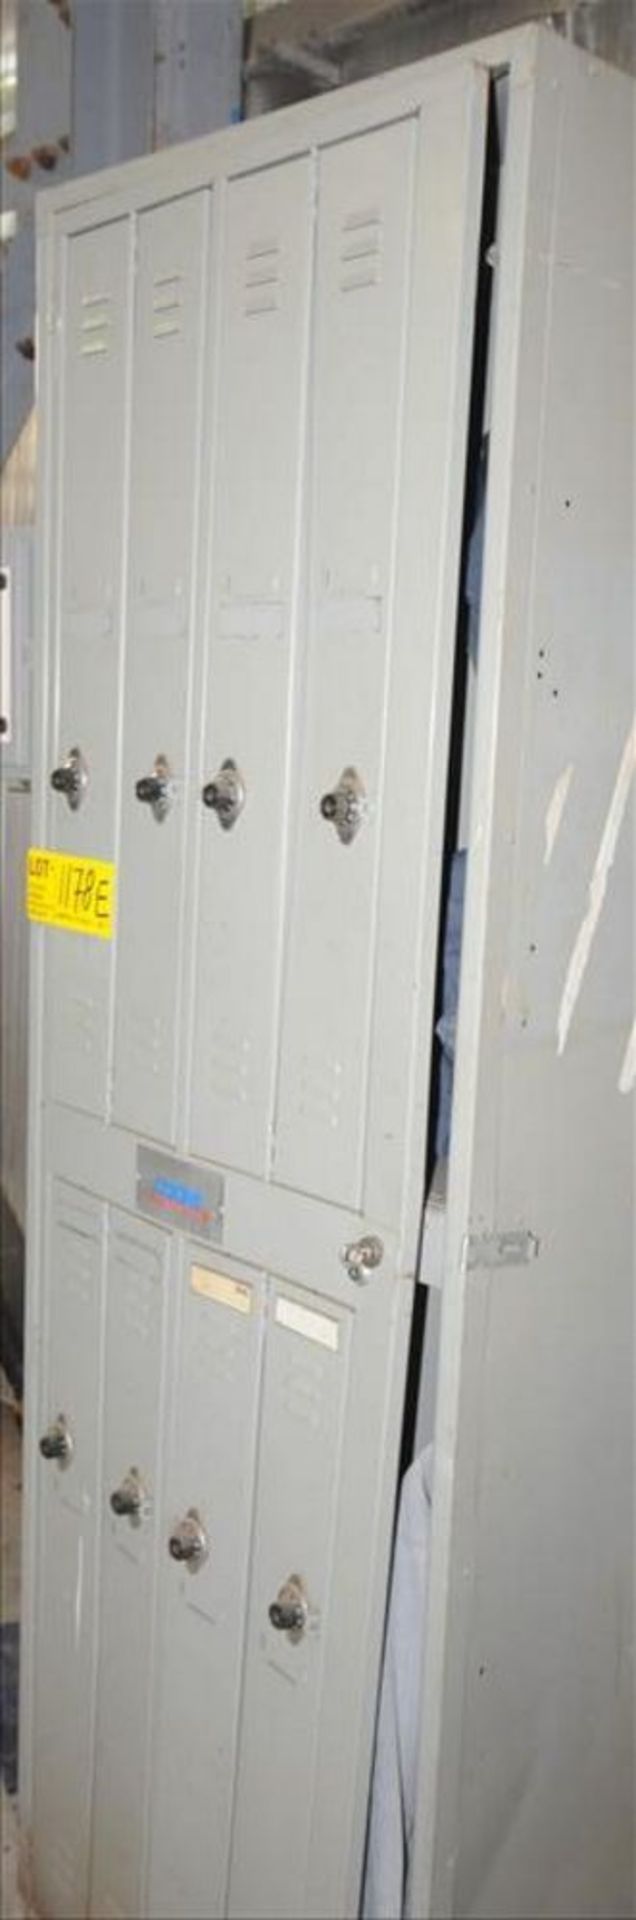 lot/ (2) emergency wash stations, lot of boxes throughout power house, and lockers [Powerhouse] - Image 3 of 4